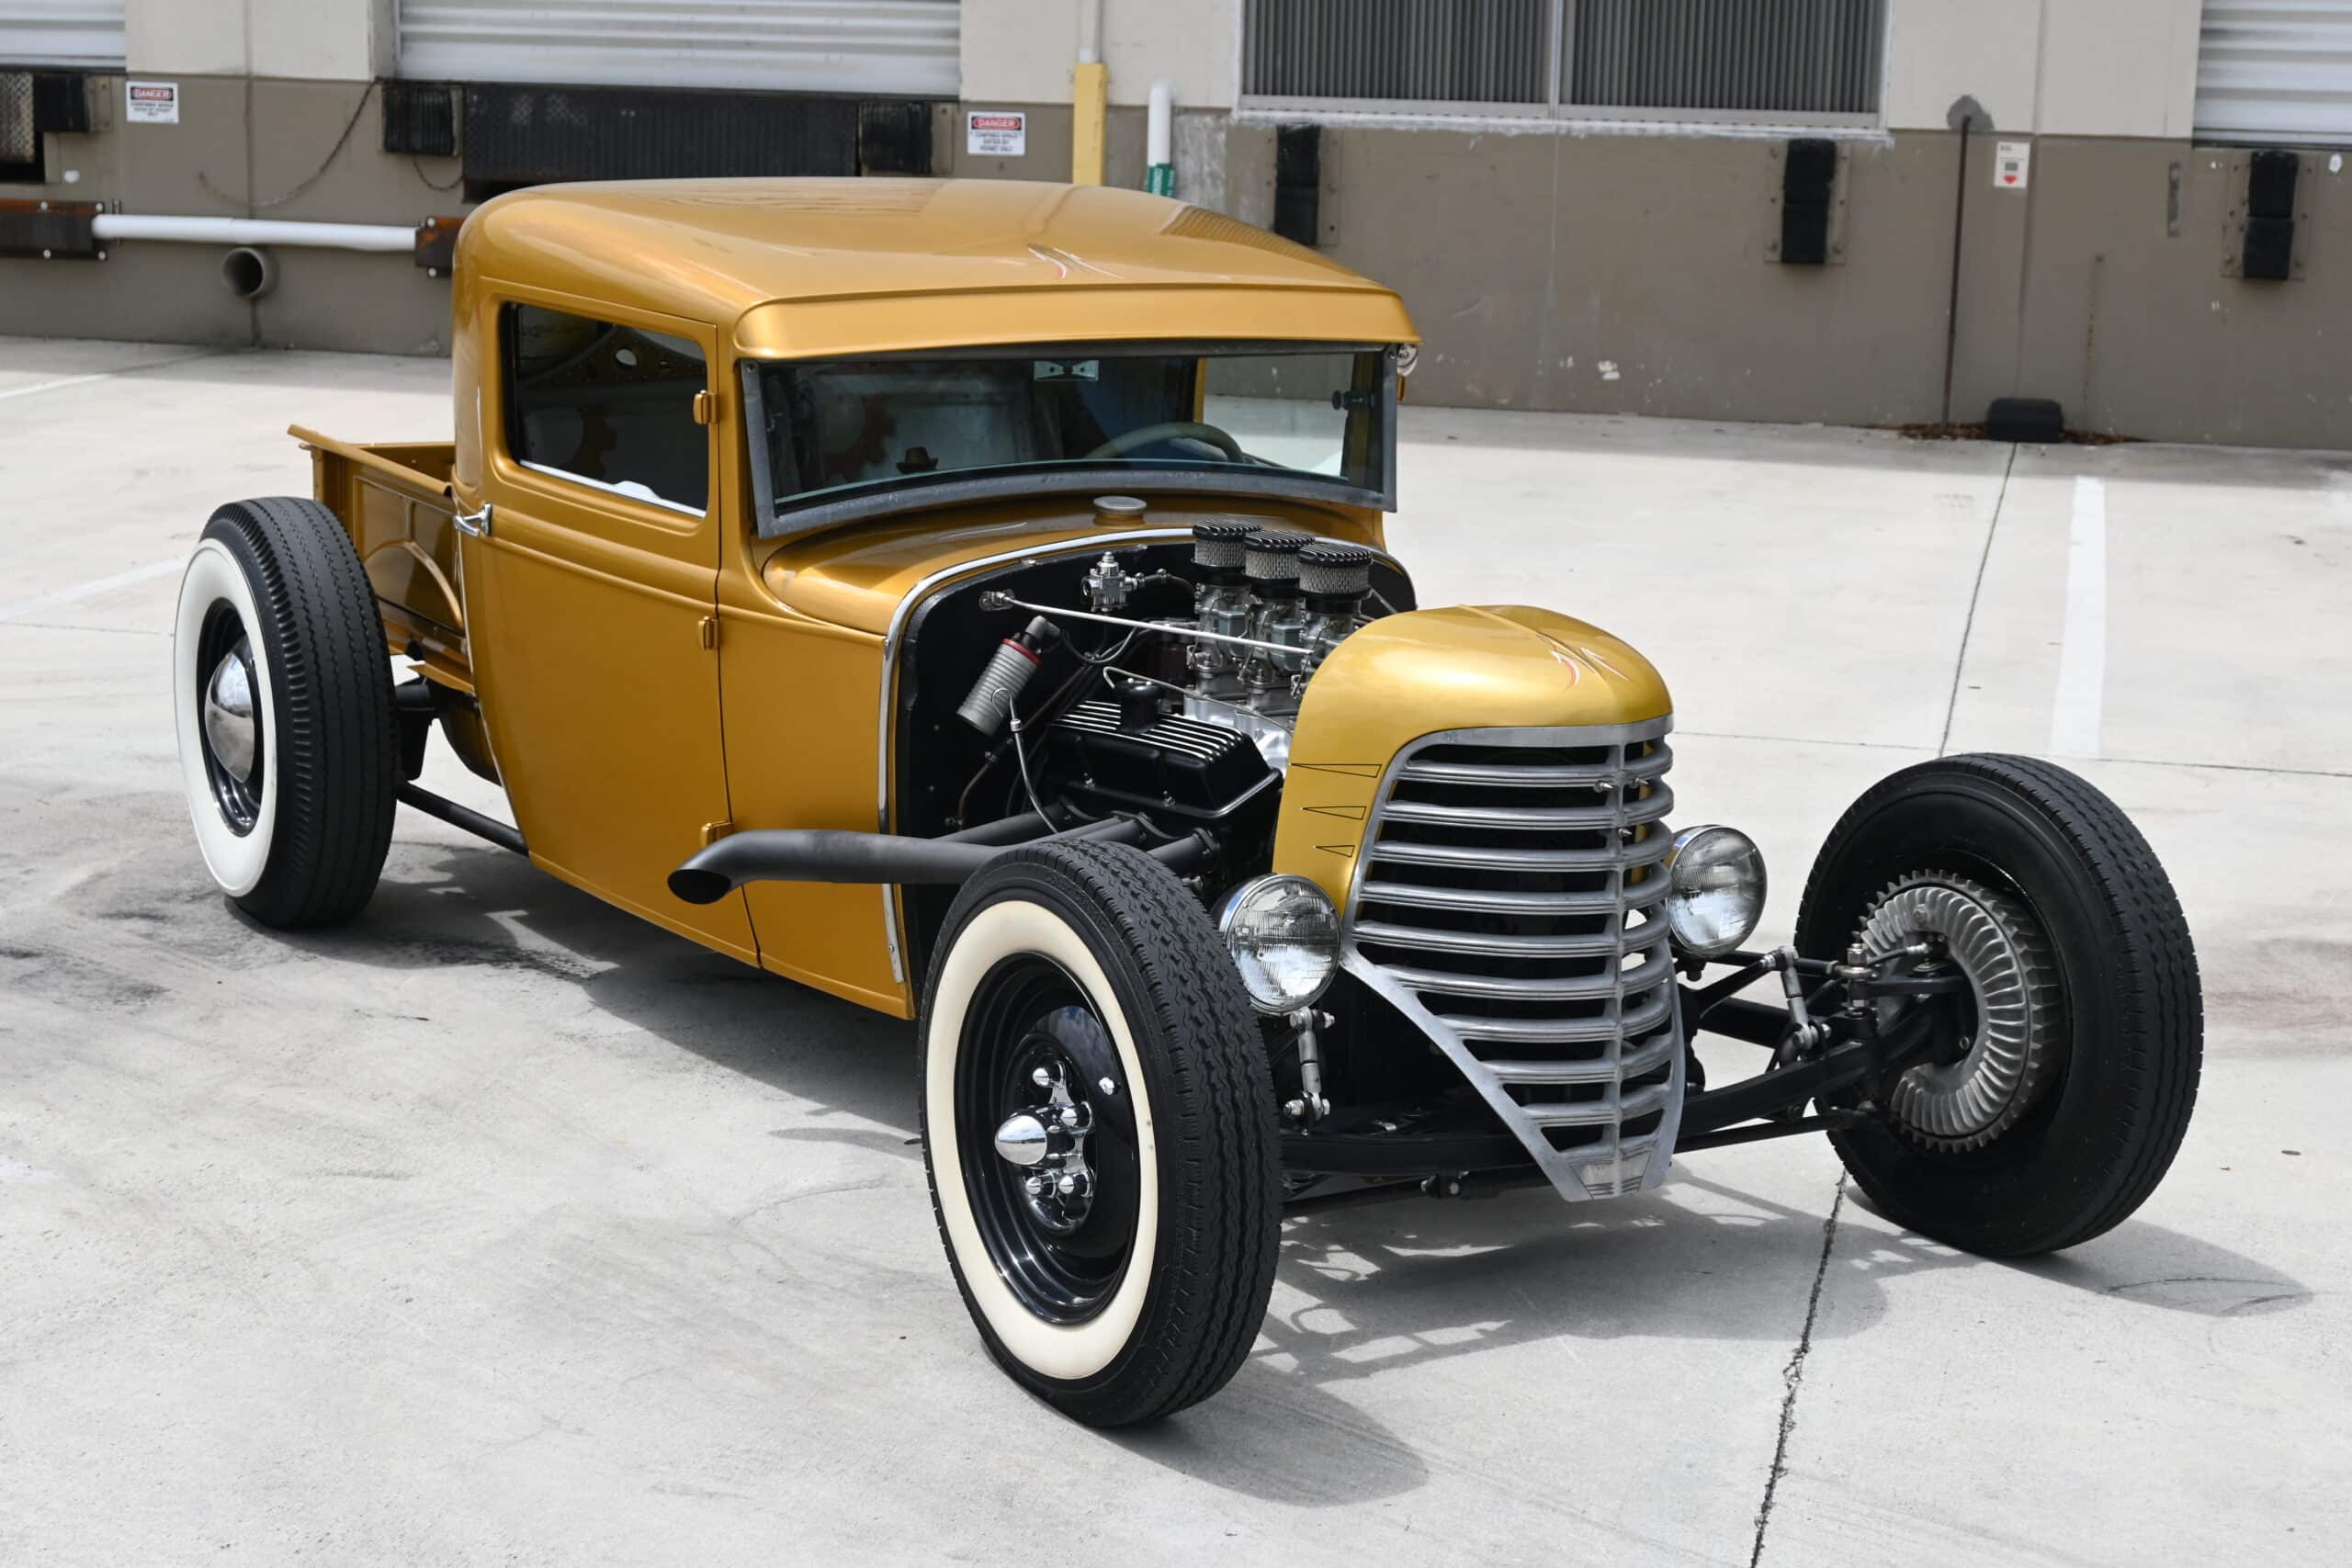 1930 Ford Model A Hot Rod / Rad Rod Hot Rod -Rat Rod – Street Road – $30K to build plus the value of the car!!! SOLID STEEL BODY – FAST AND RELIABLE – 5.7 LITER – 5 SPEED